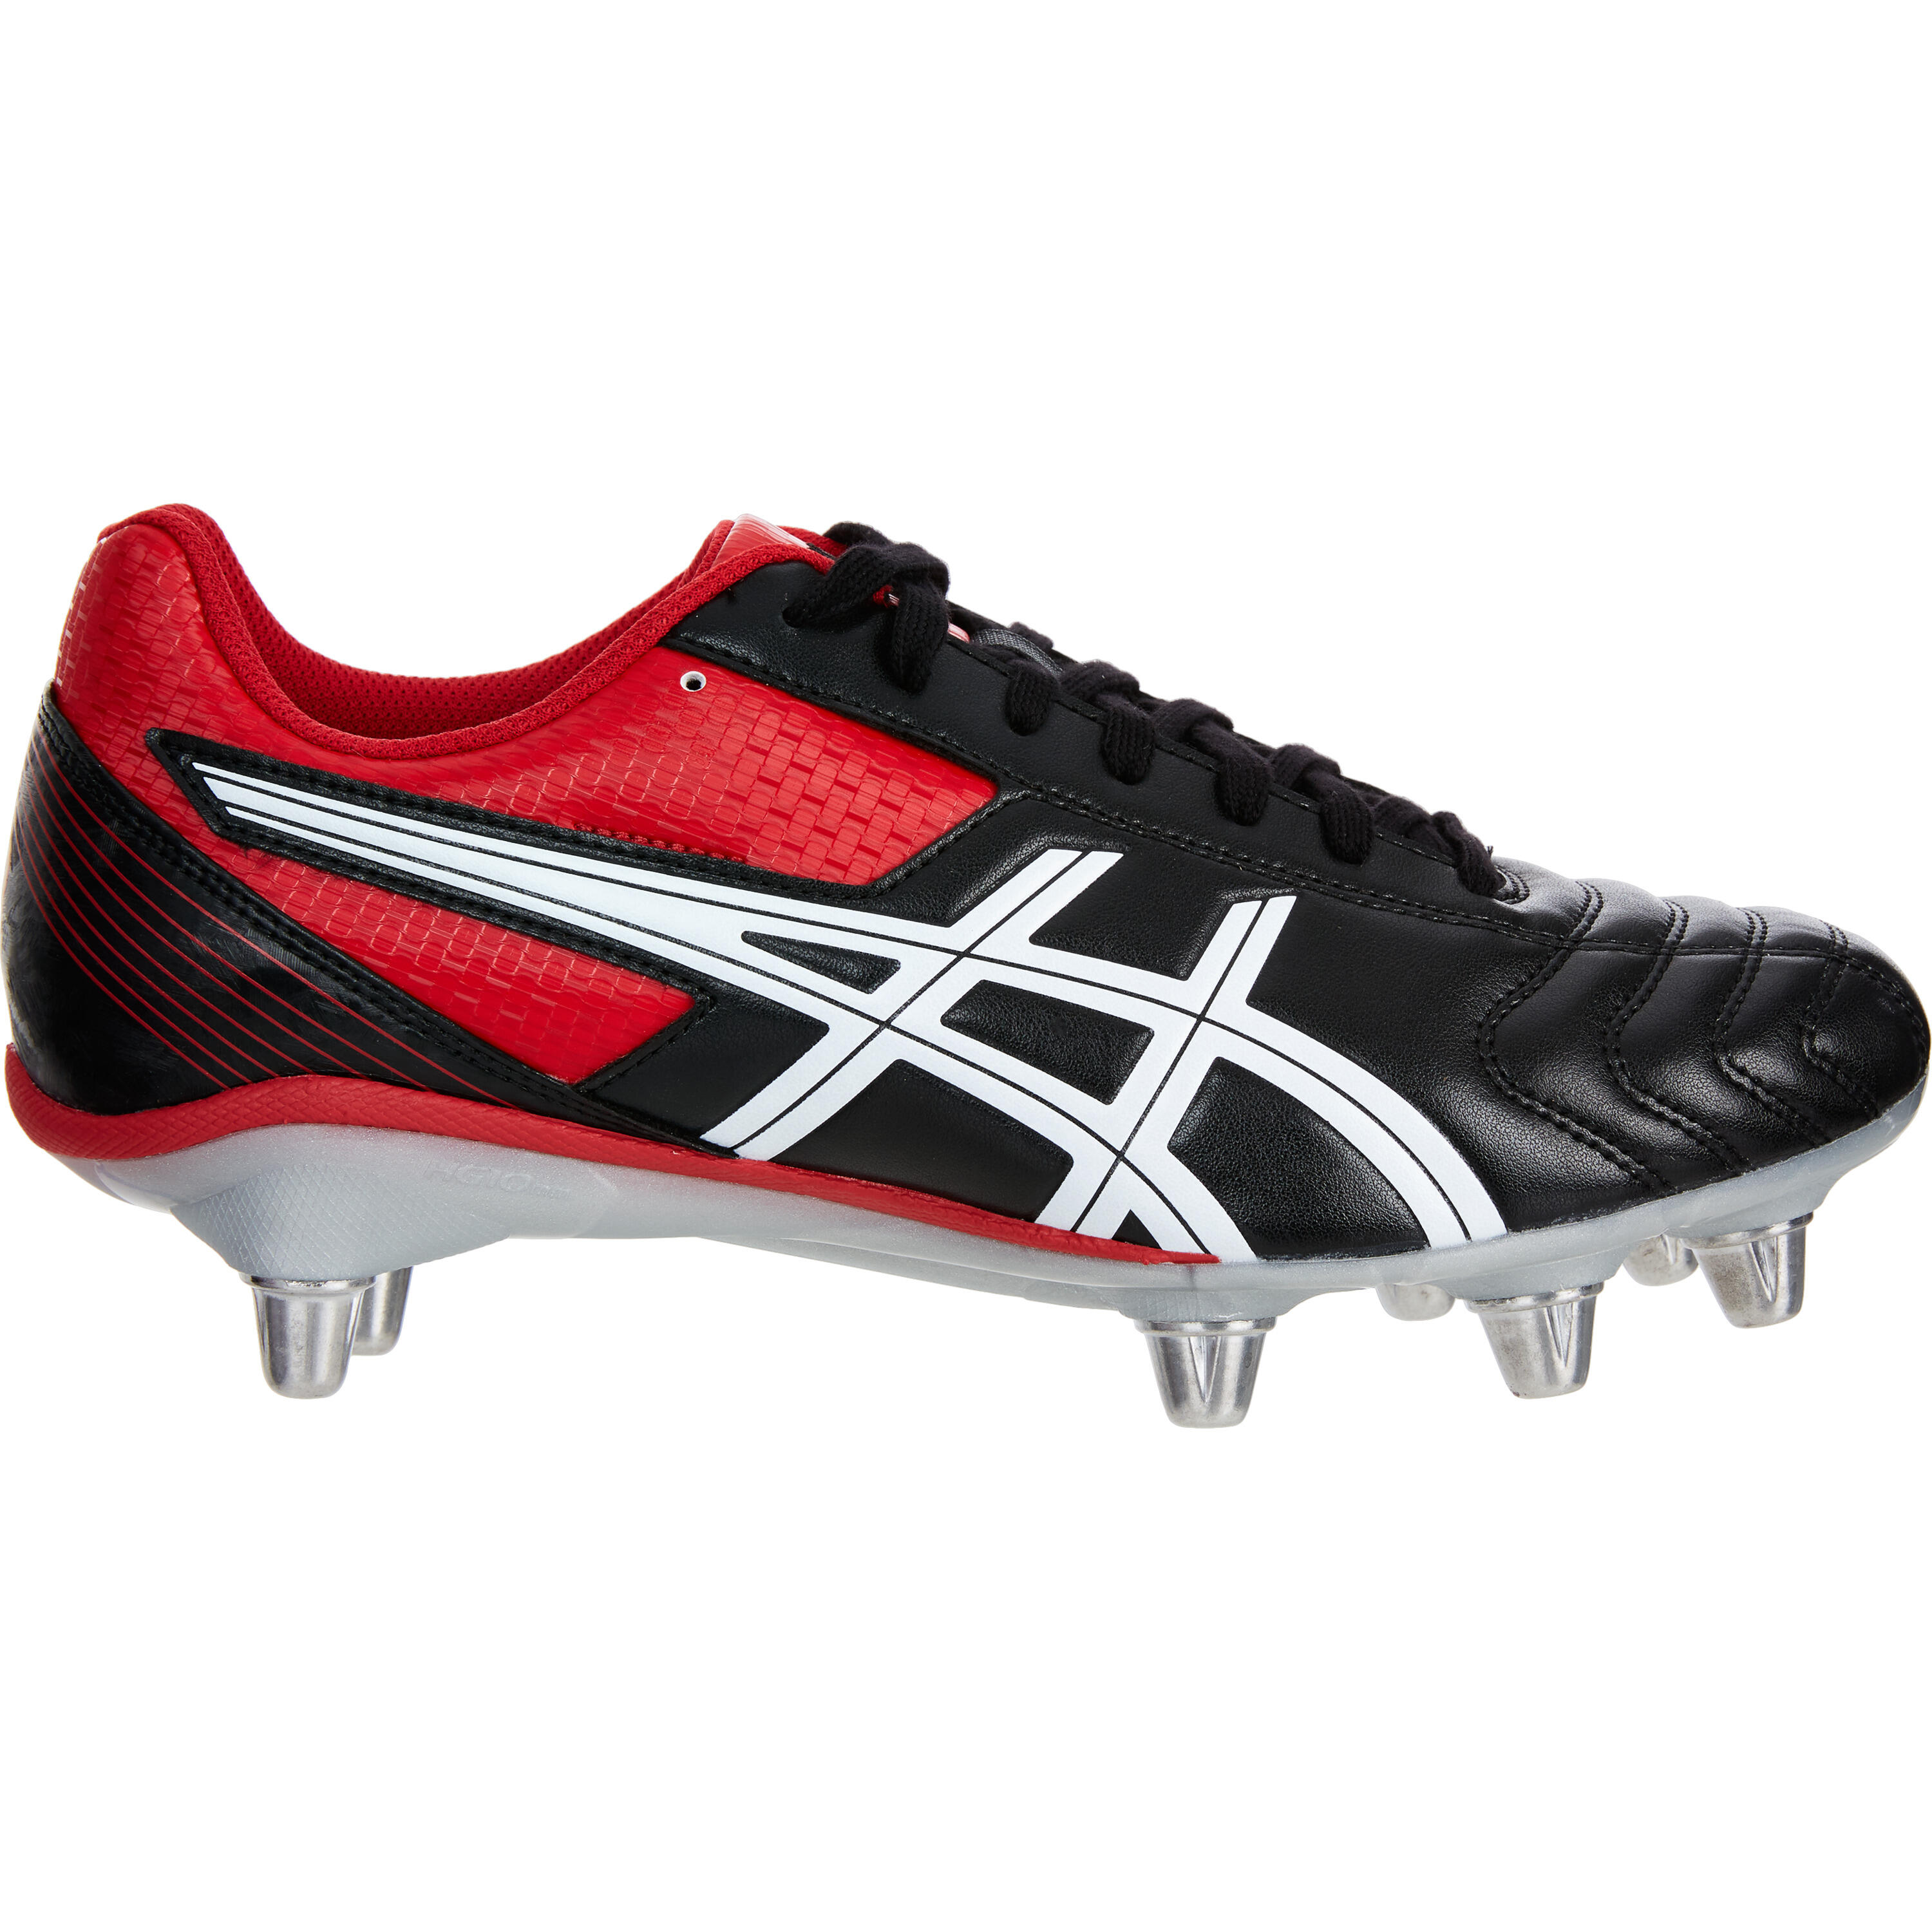 Asics Lethal Tackle Soft Ground Rugby Boots Adults  7 UK black/racing red/white 1/5